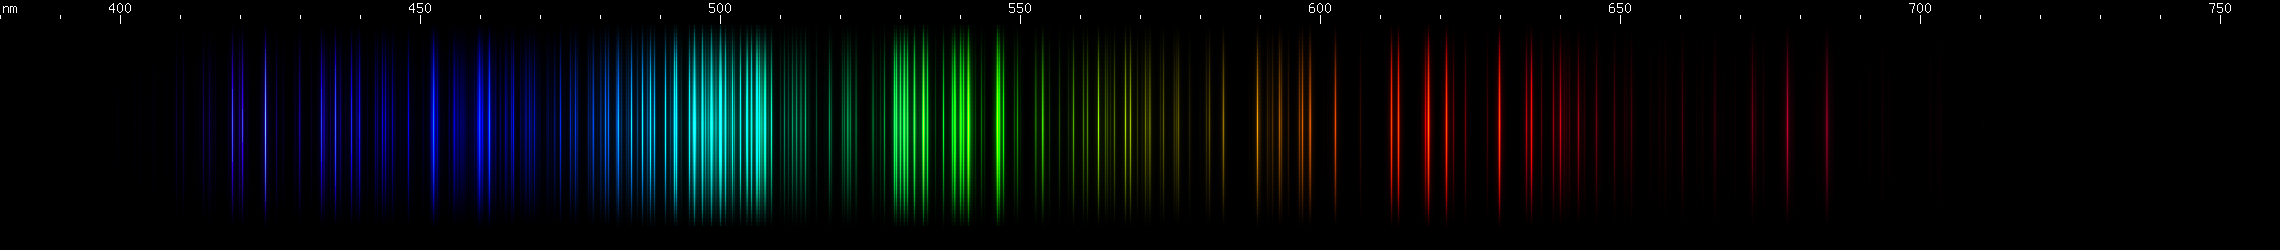 Spectral Lines of Thulium